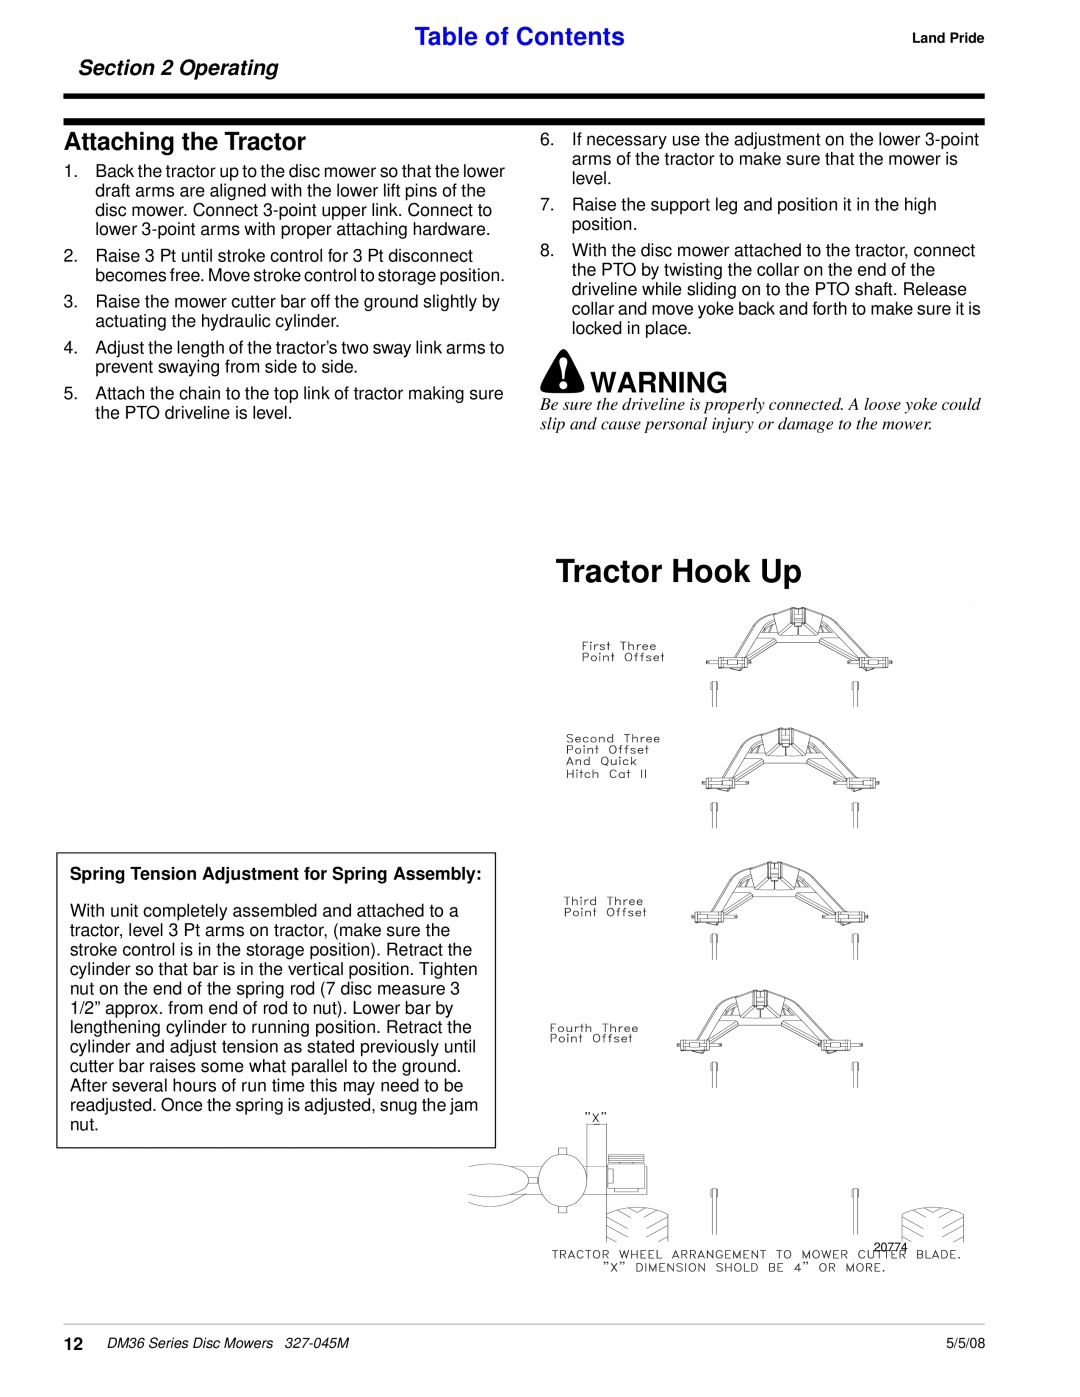 Land Pride DM36 Series manual Tractor Hook Up, Attaching the Tractor, Operating, Table of Contents 